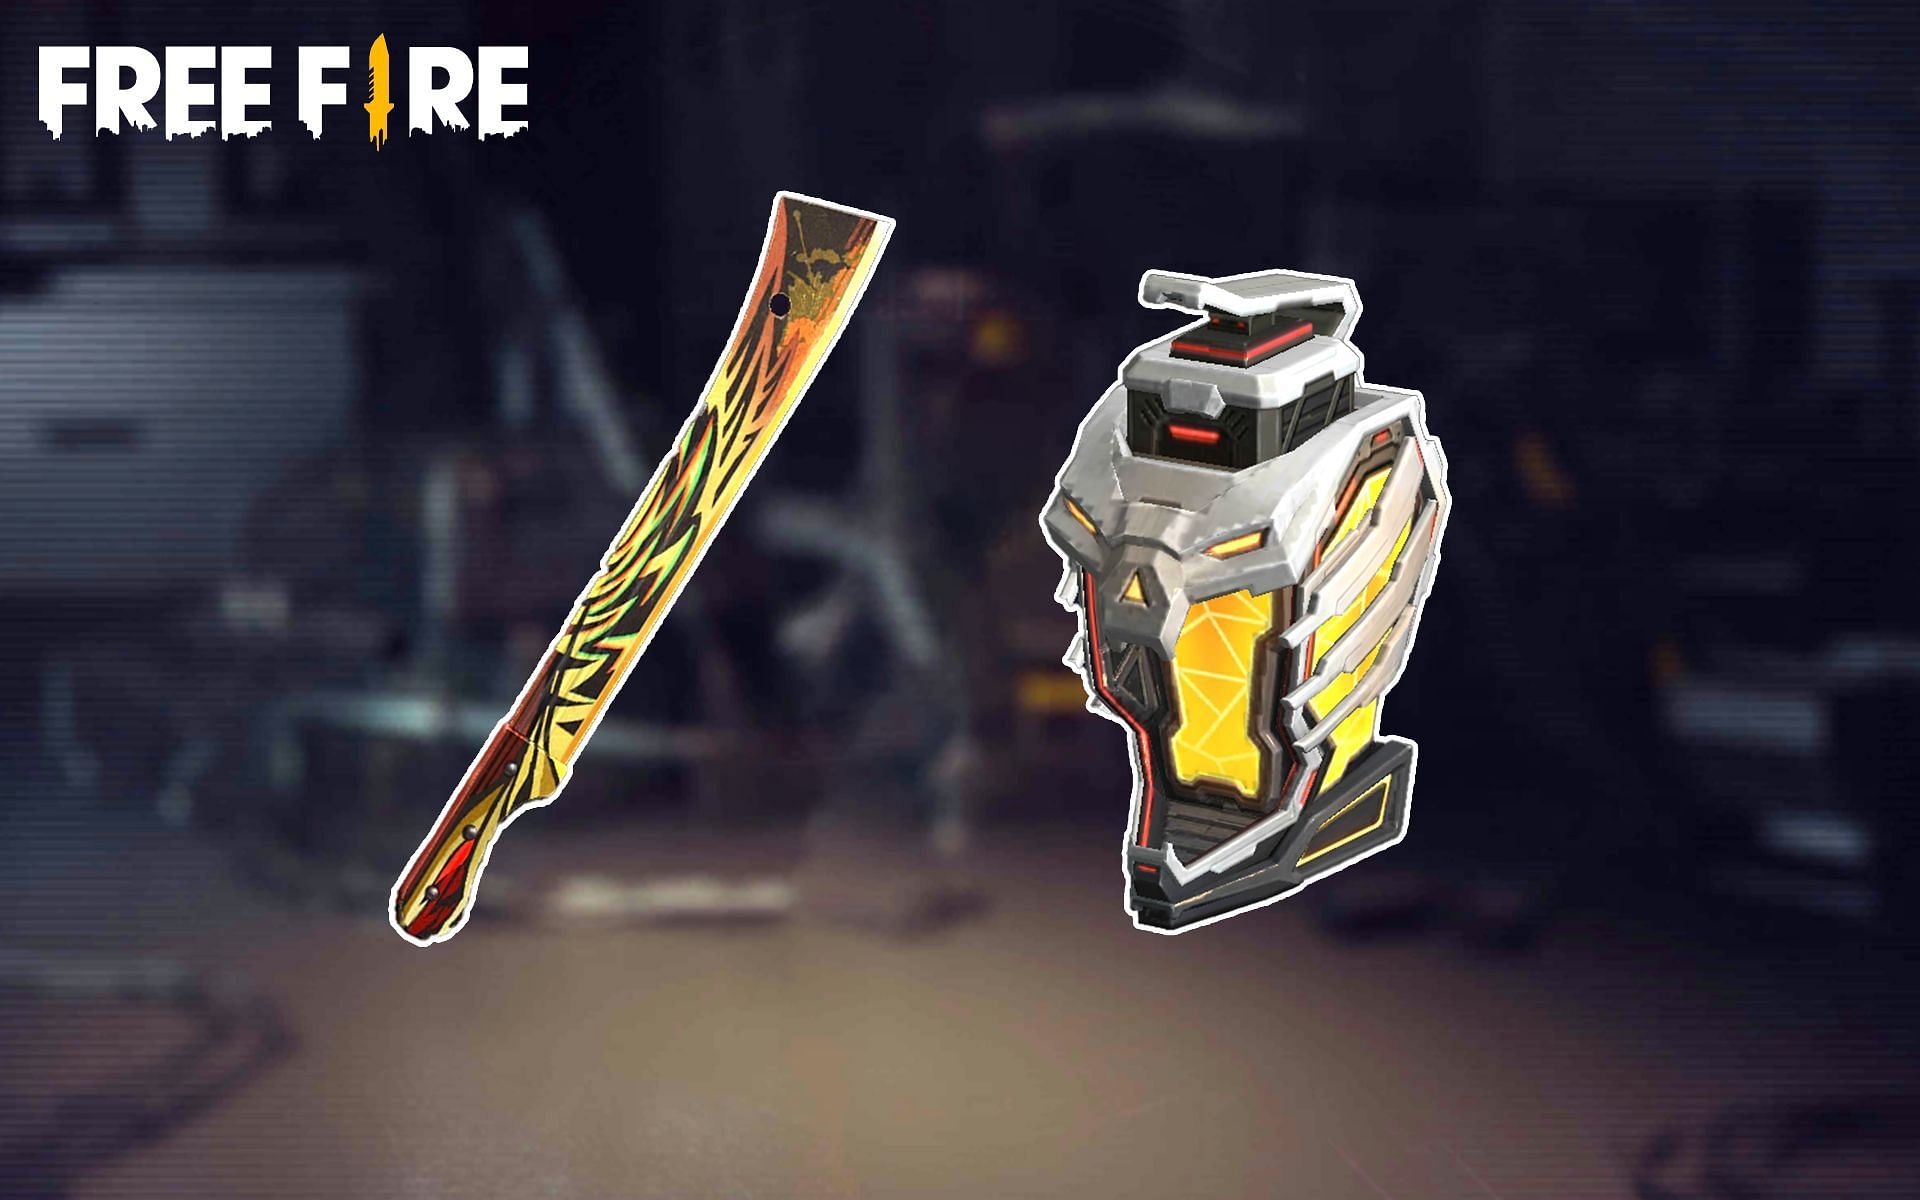 The two permanent rewards for the event (Image via Free Fire)